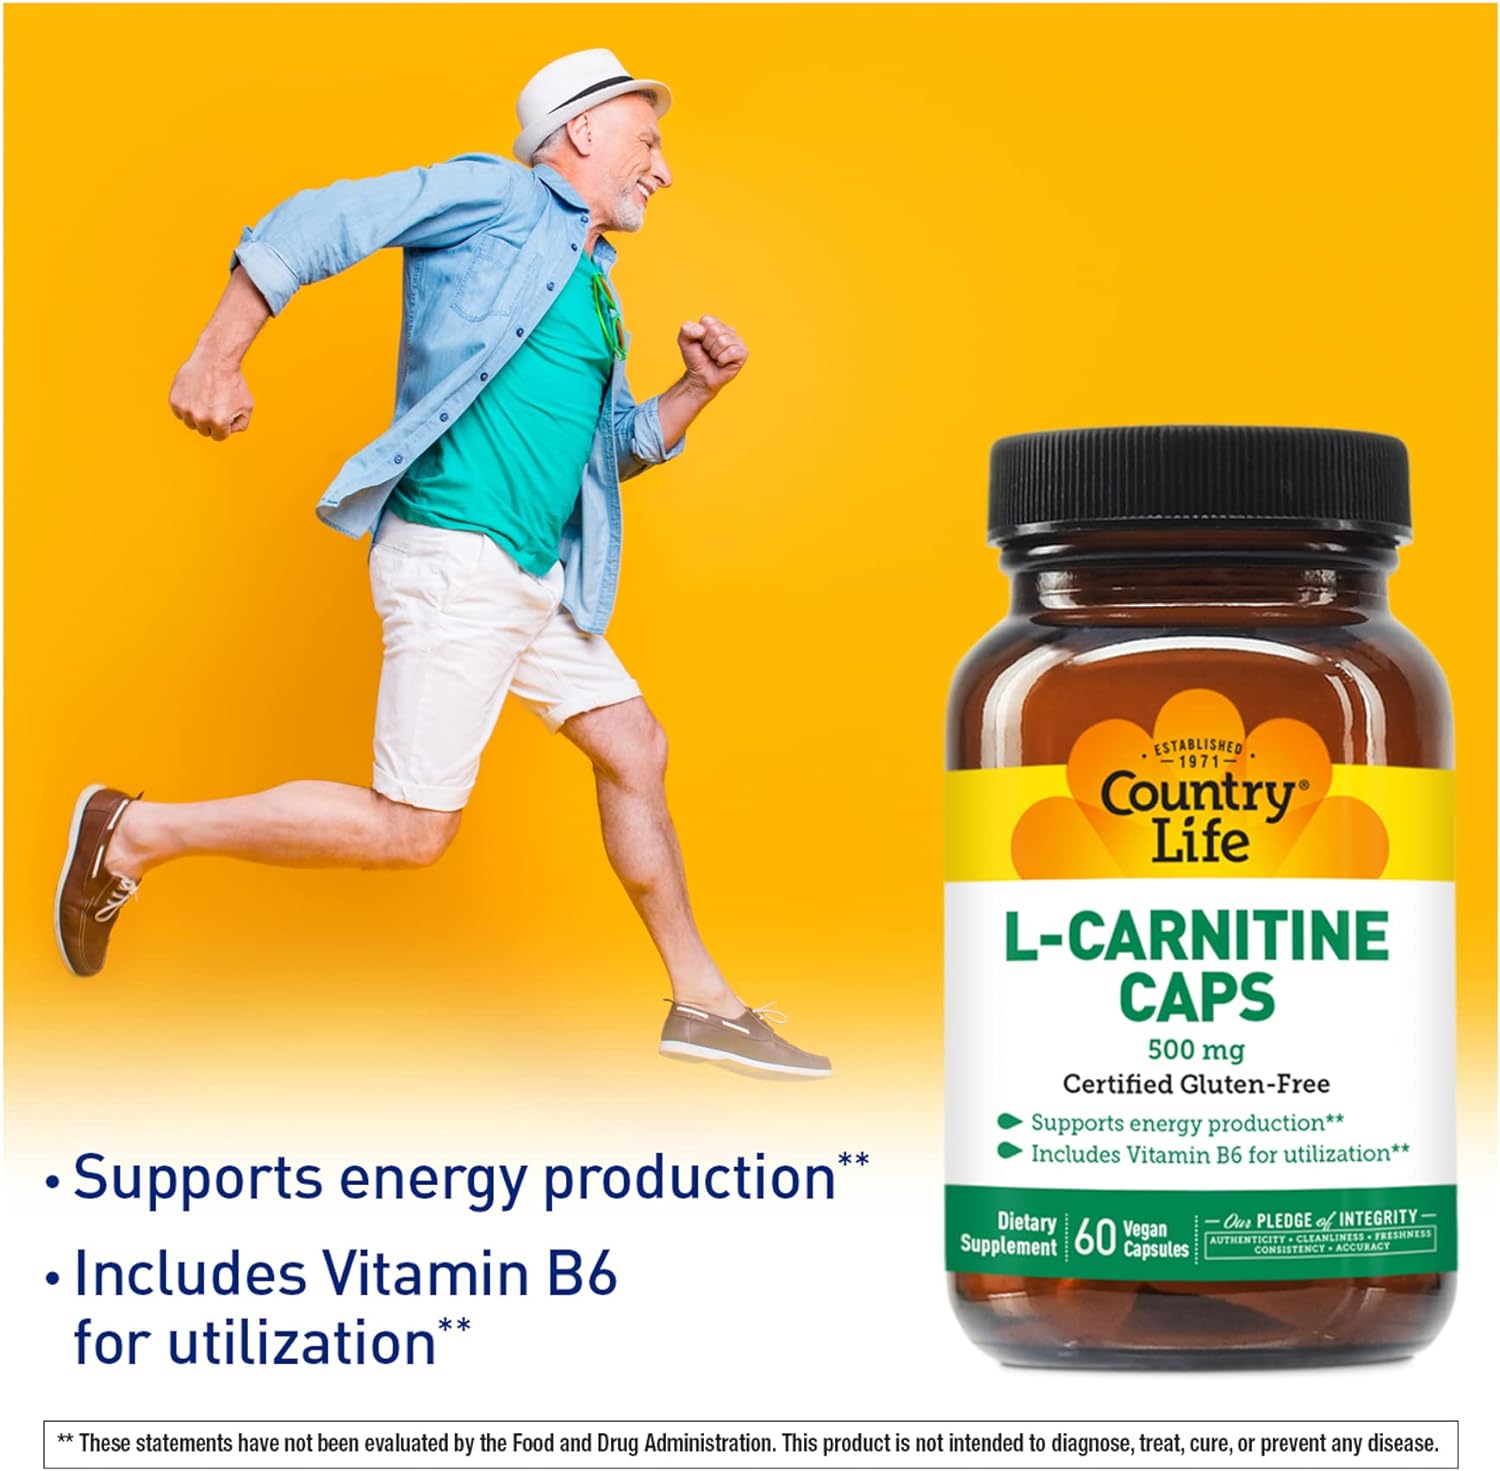 Country Life L-Carnitine Caps 500mg, 60 Capsules, Certified Gluten-Fre